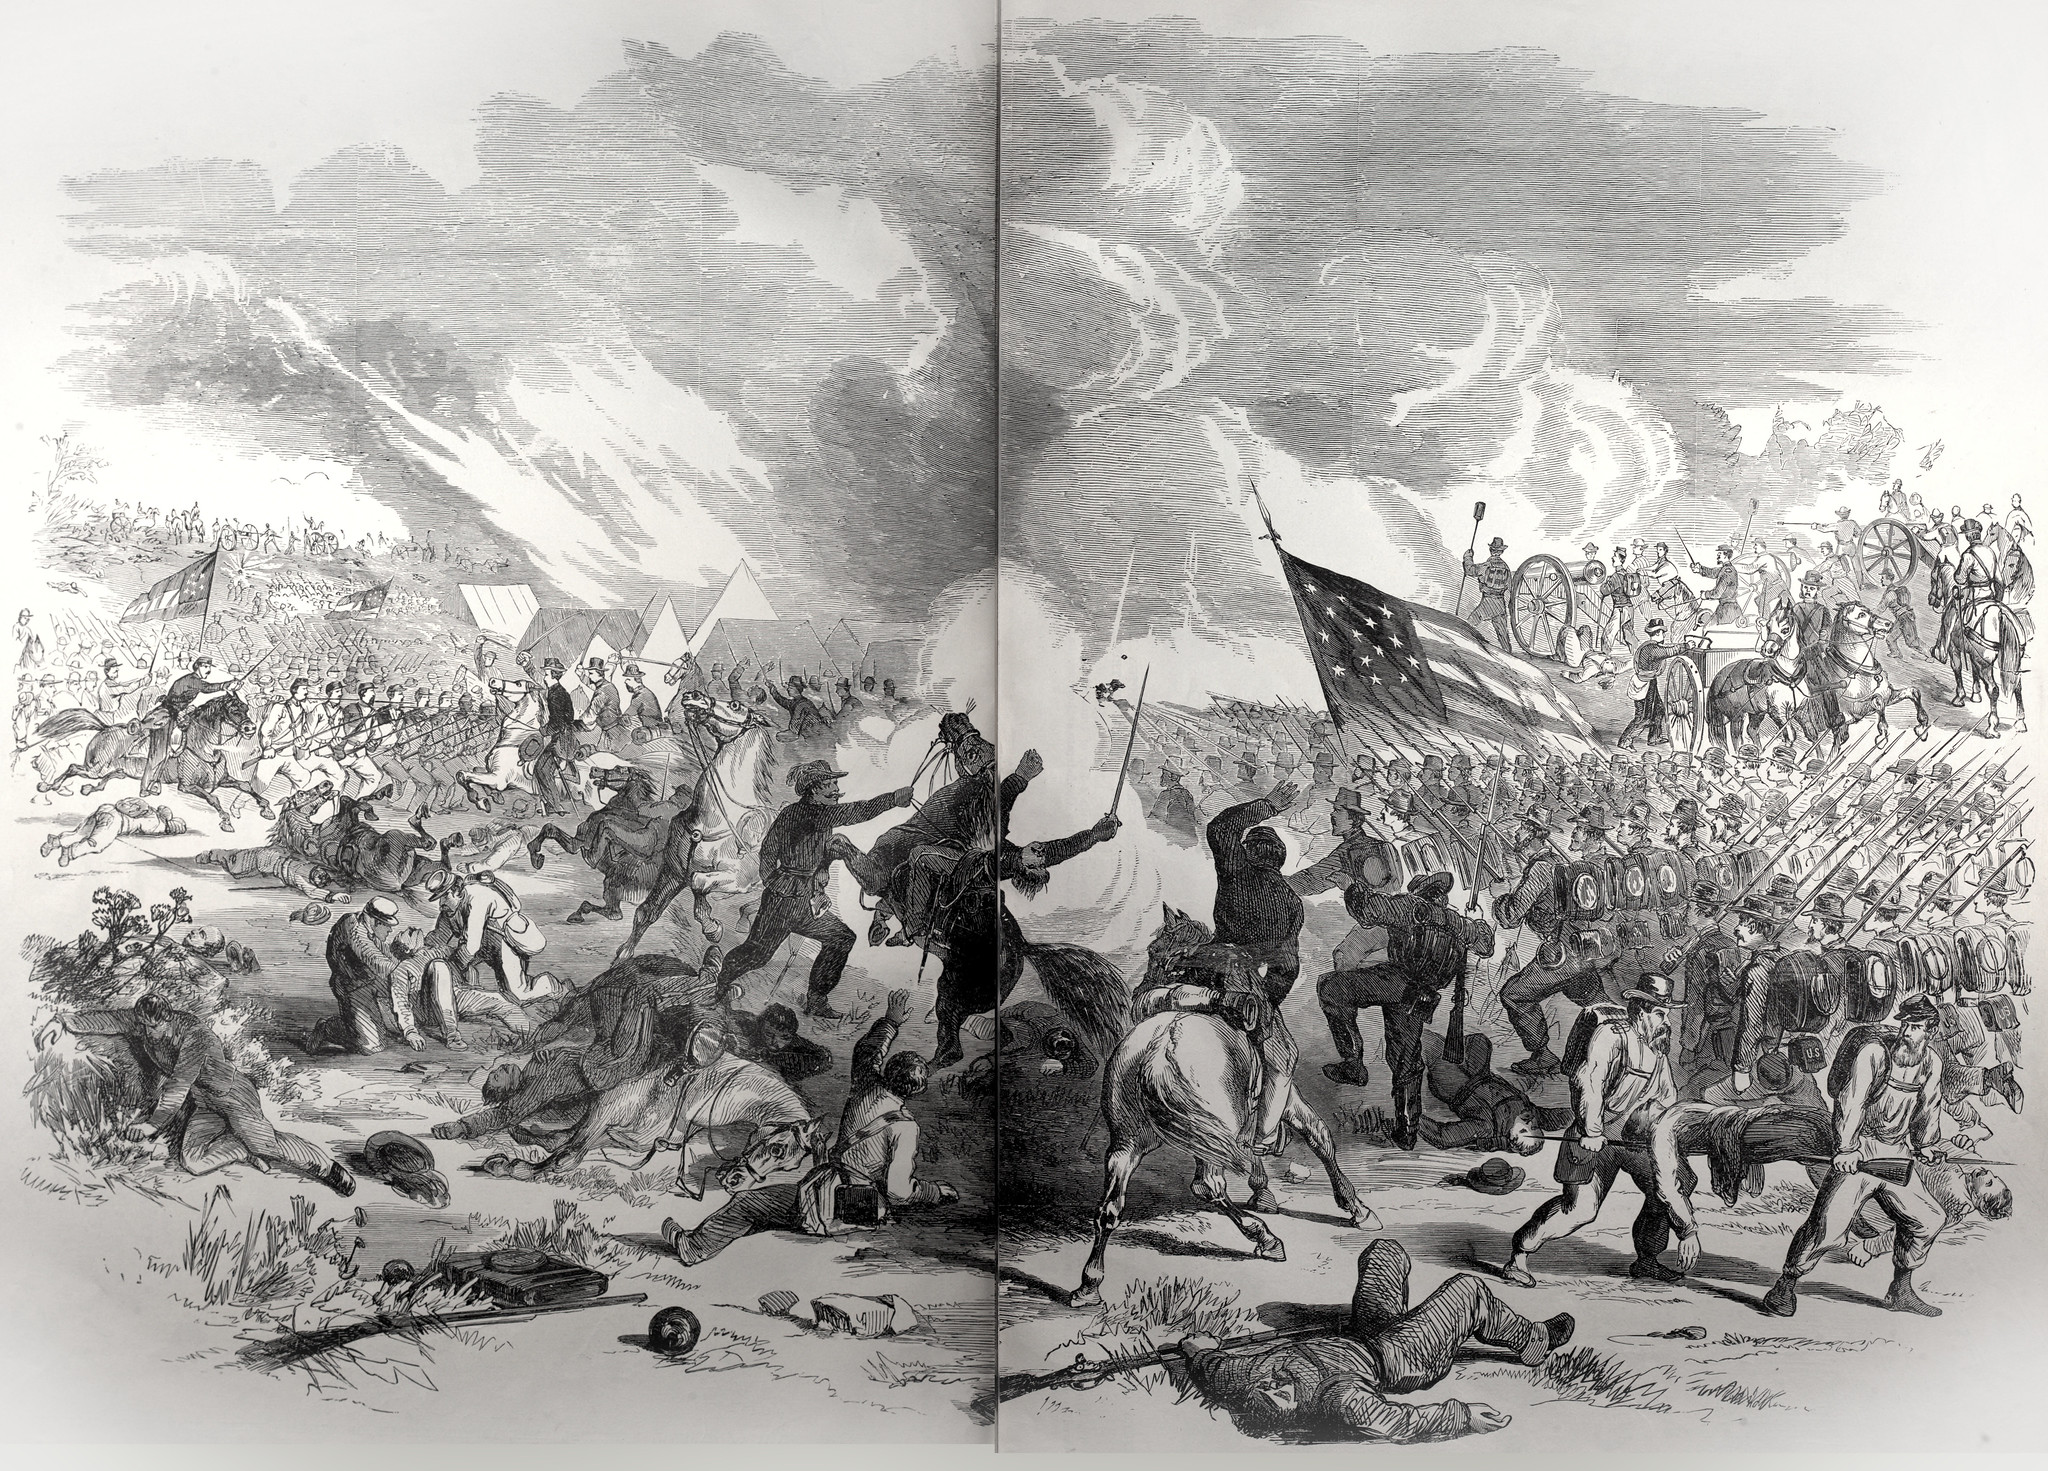 Battle at Wilson’s Creek, near Springfield, Mo., between 5,500 Union Troops under Generals Lyon and Sigel, and 23,000 Confederates under Generals McCulloch and Price, August 10th, 1861.